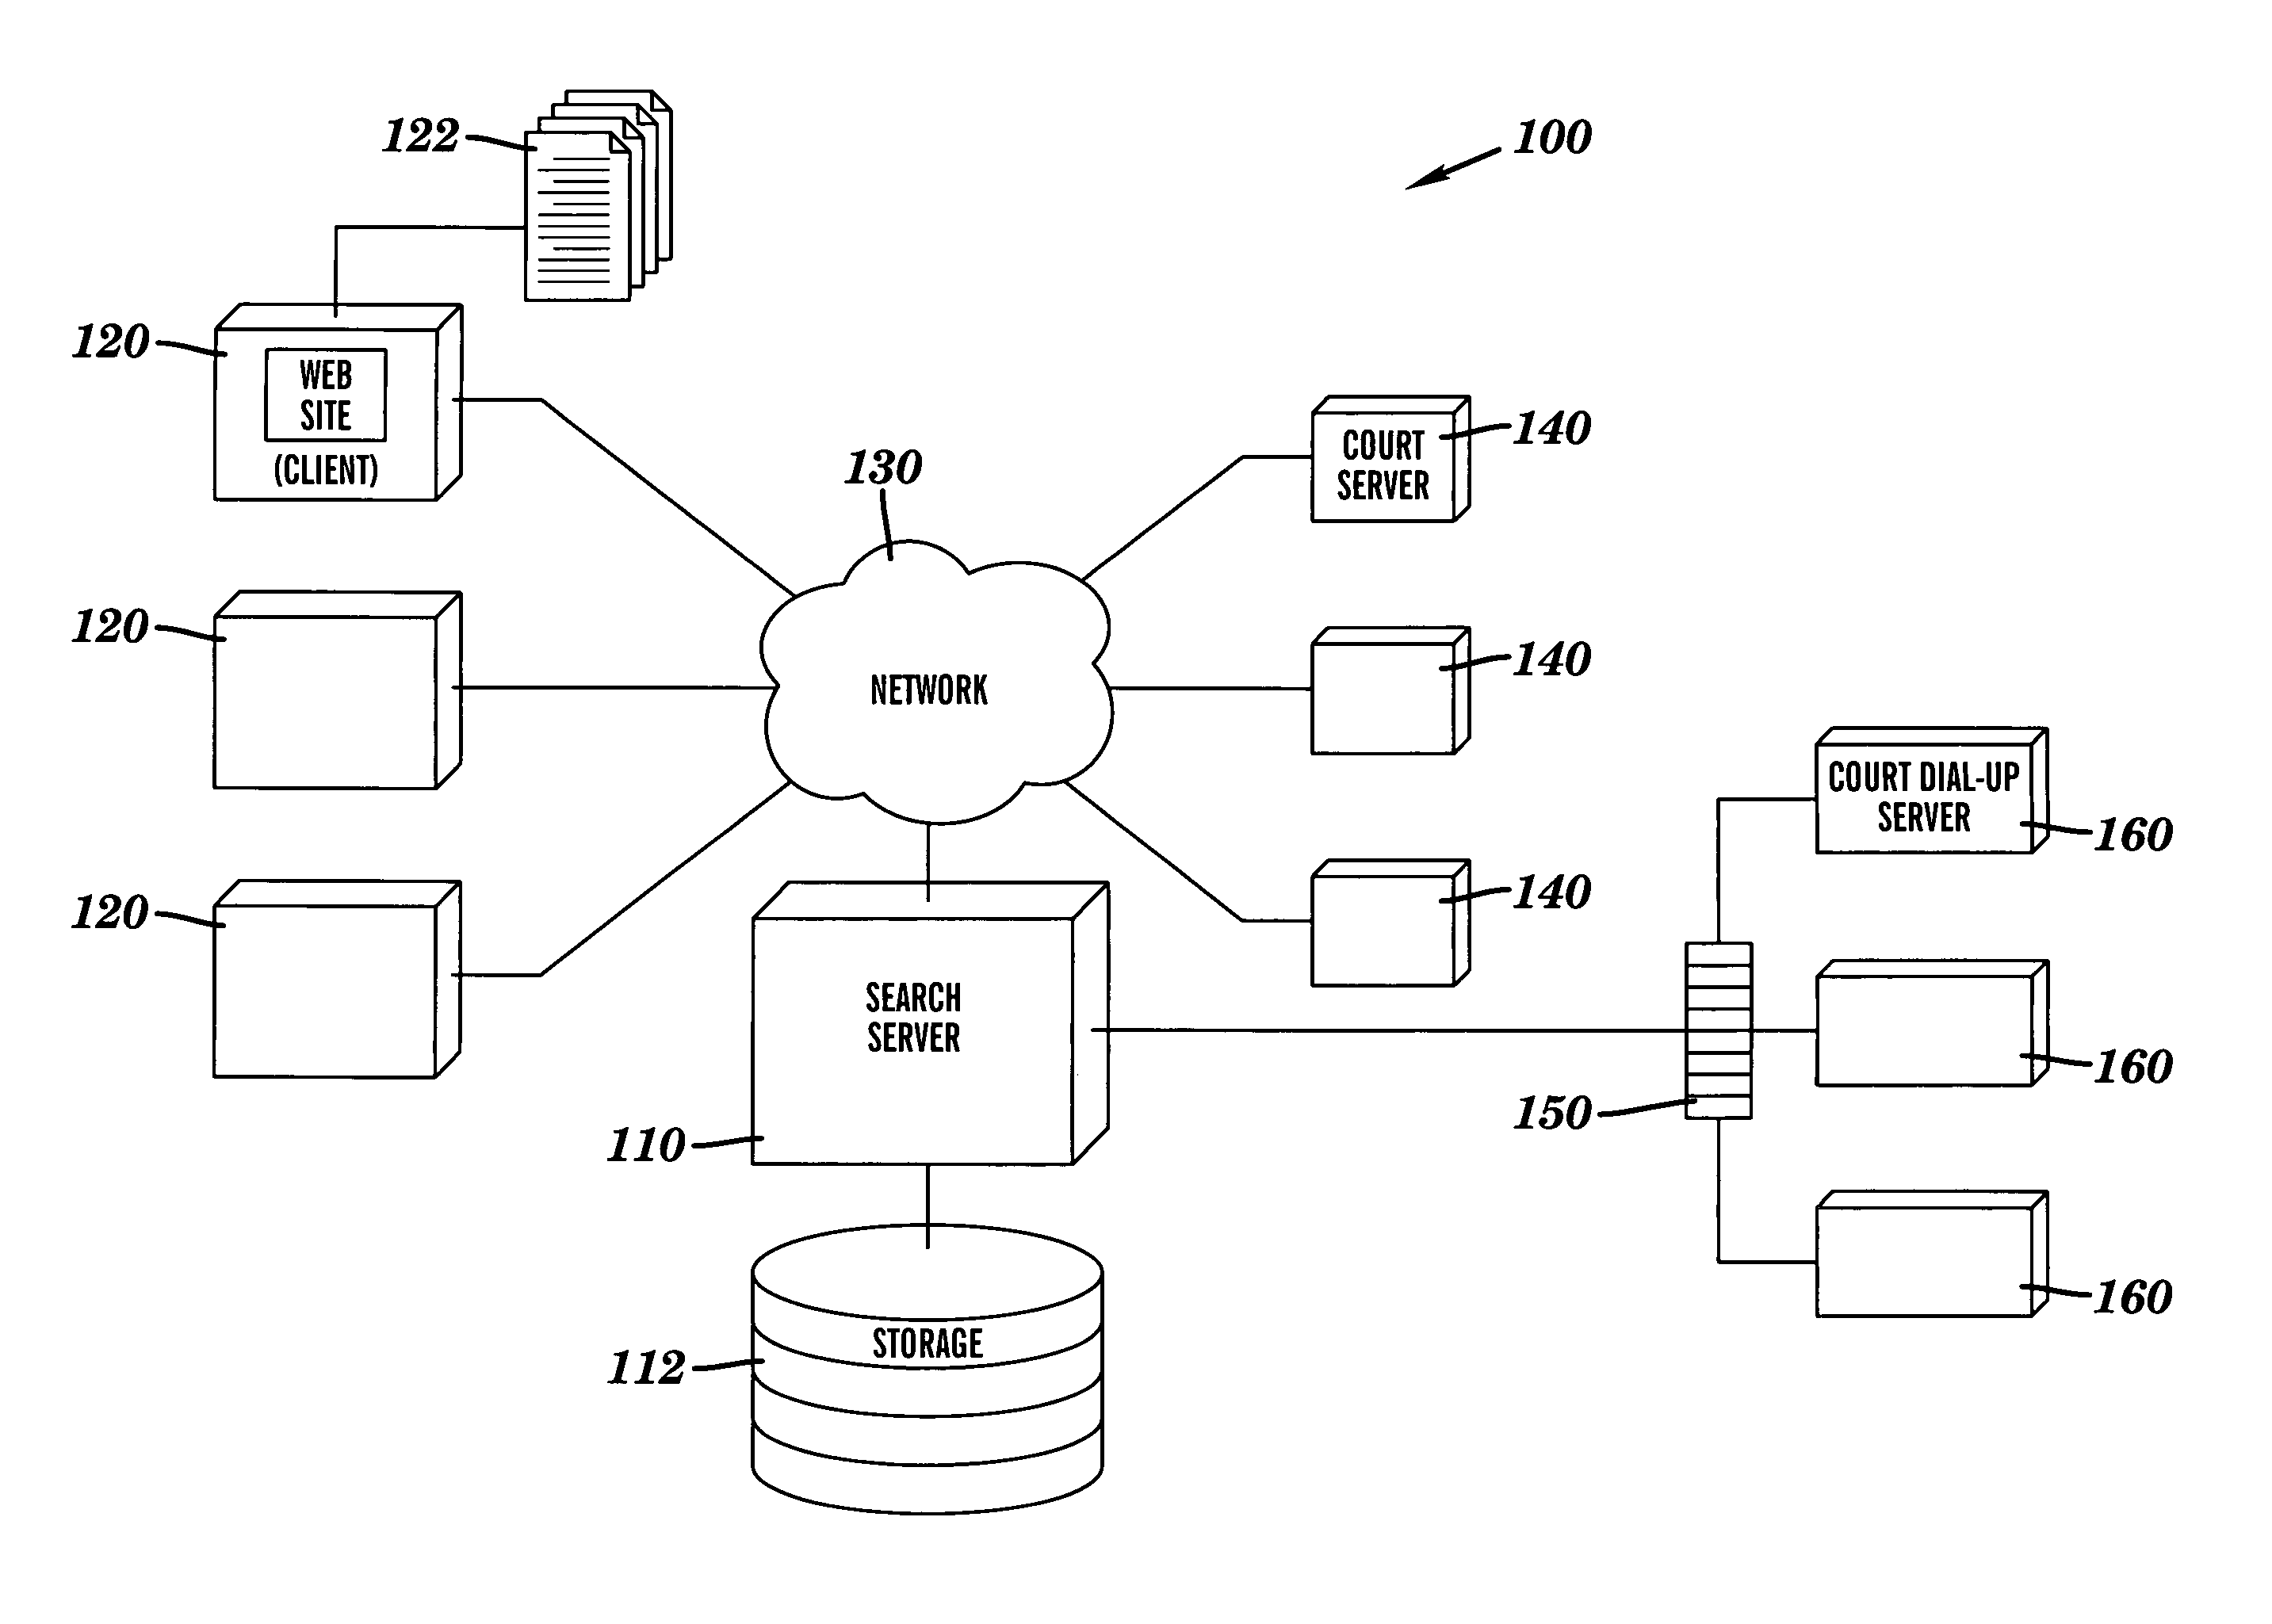 Method, system and computer-readable medium for accessing and retrieving court records, items and documents